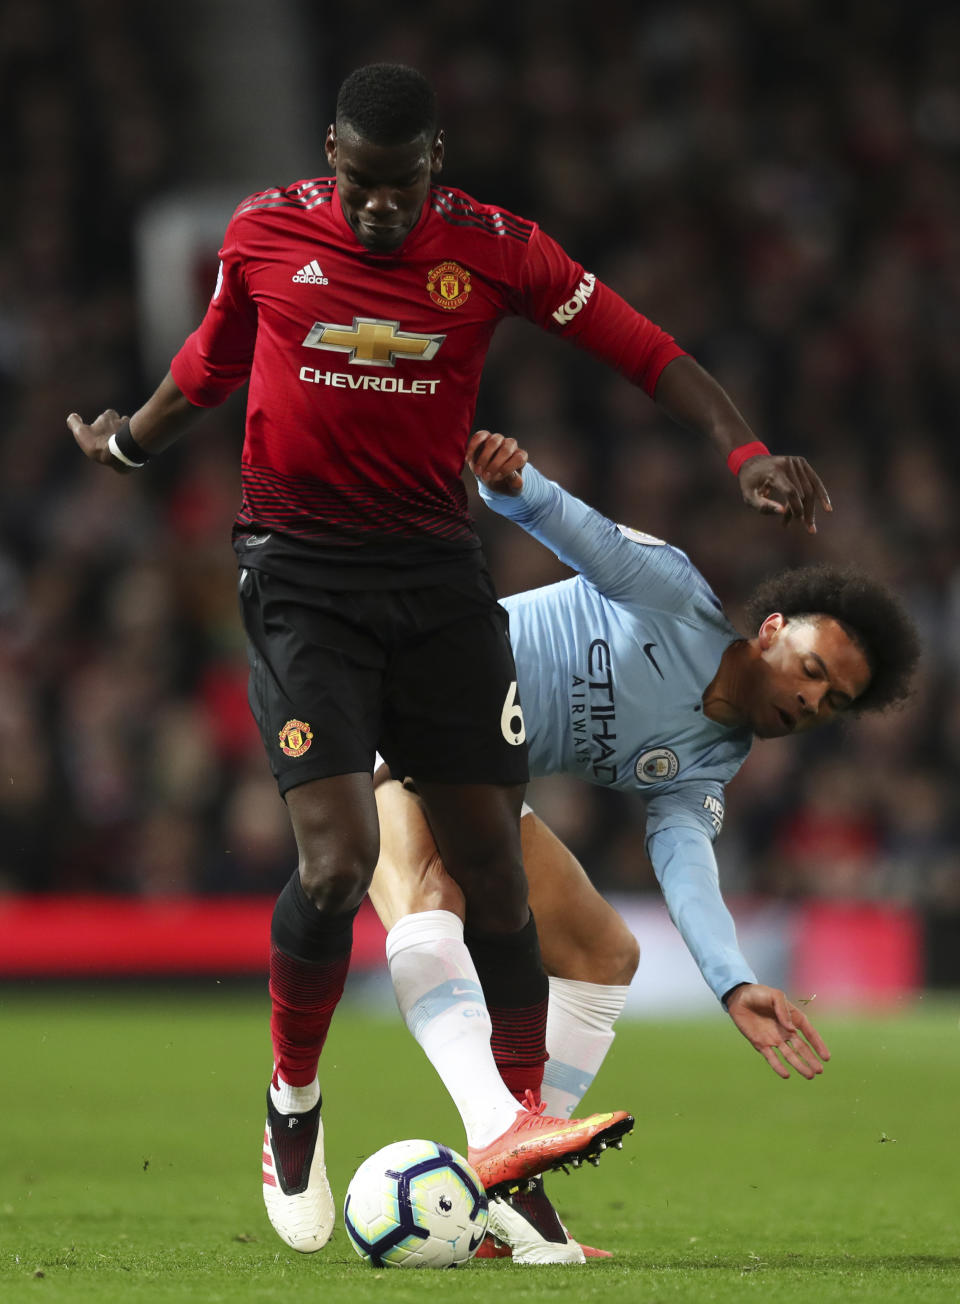 Manchester City's Leroy Sane fights for the ball with Manchester United's Paul Pogba, left, during the English Premier League soccer match between Manchester United and Manchester City at Old Trafford Stadium in Manchester, England, Wednesday April 24, 2019. (AP Photo/Jon Super)